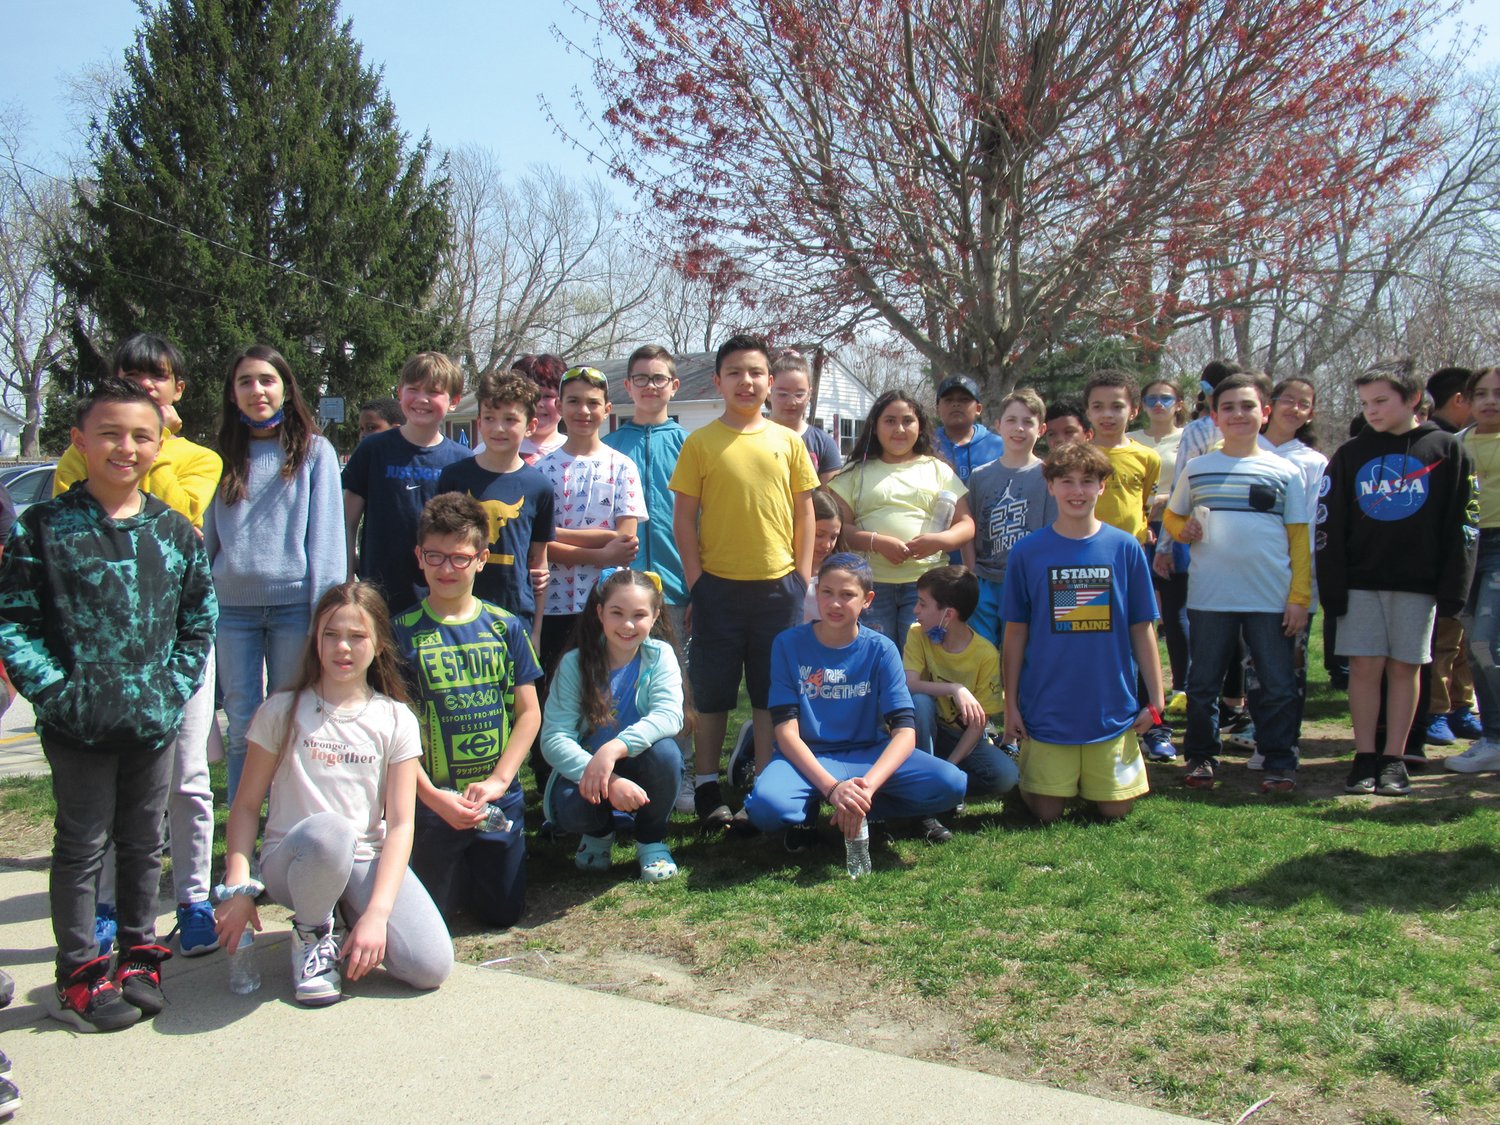 PROUD PACK: This is yet another group of Winsor Hill Elementary students who recorded a special success story during the school’s “Walk for the Ukraine.”